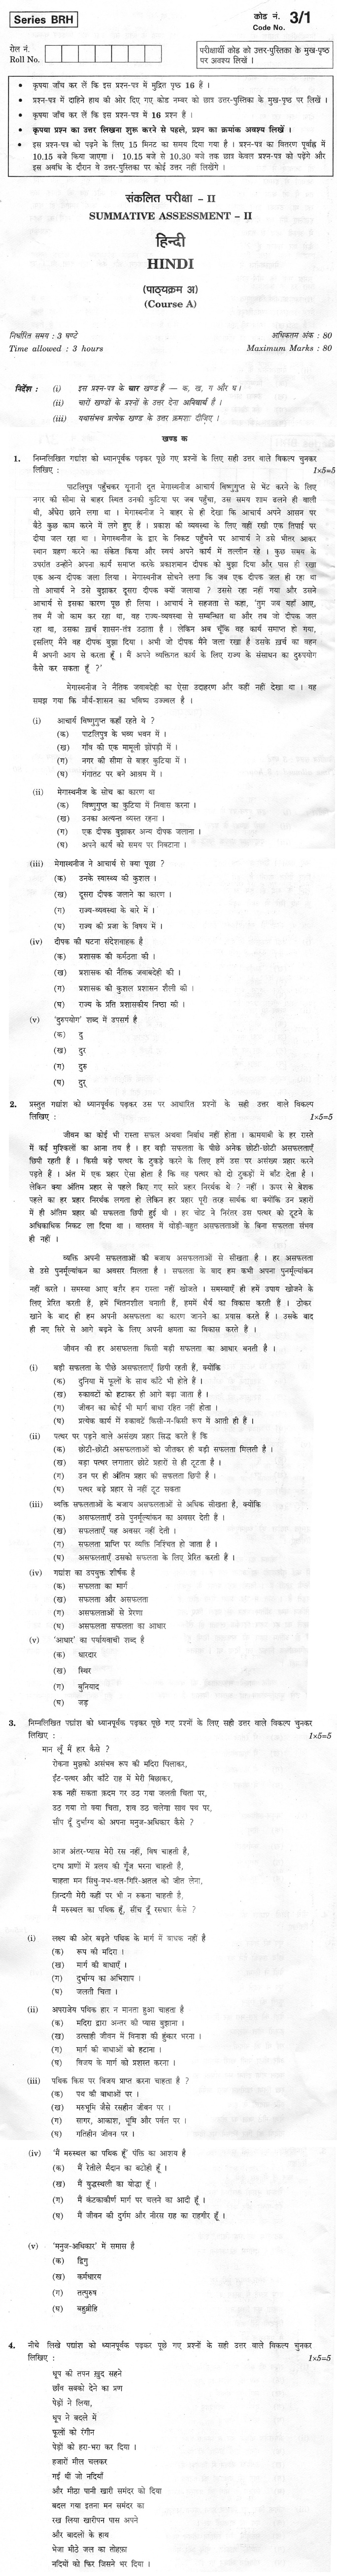 CBSE Class X Previous Year Question Papers 2012 Hindi(Course A)